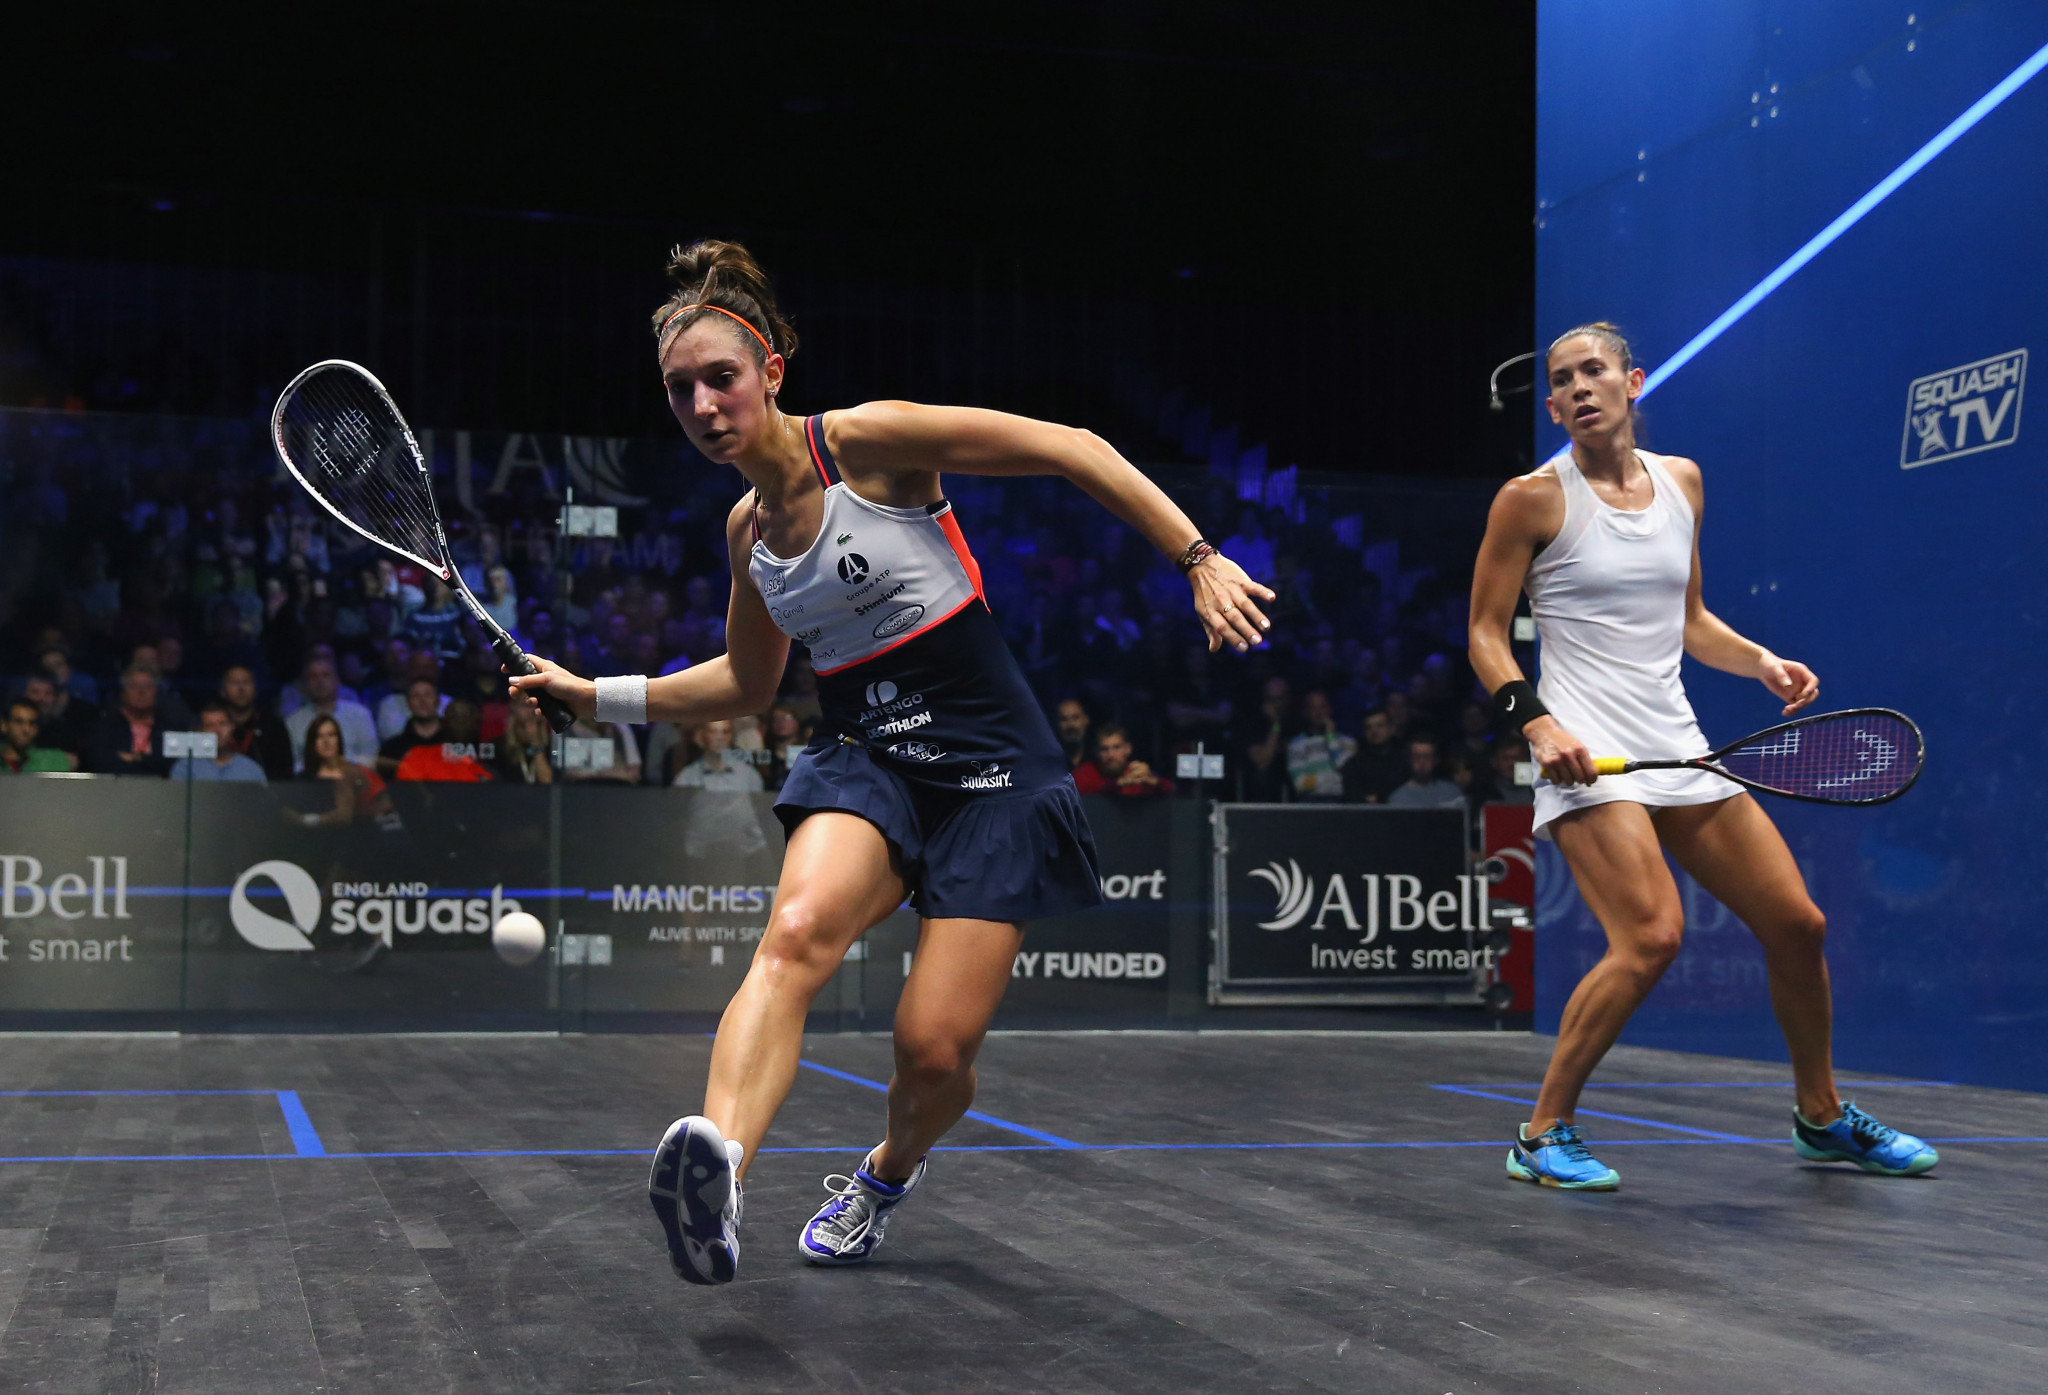 Top seeds advance to last eight at PSA Manchester Open